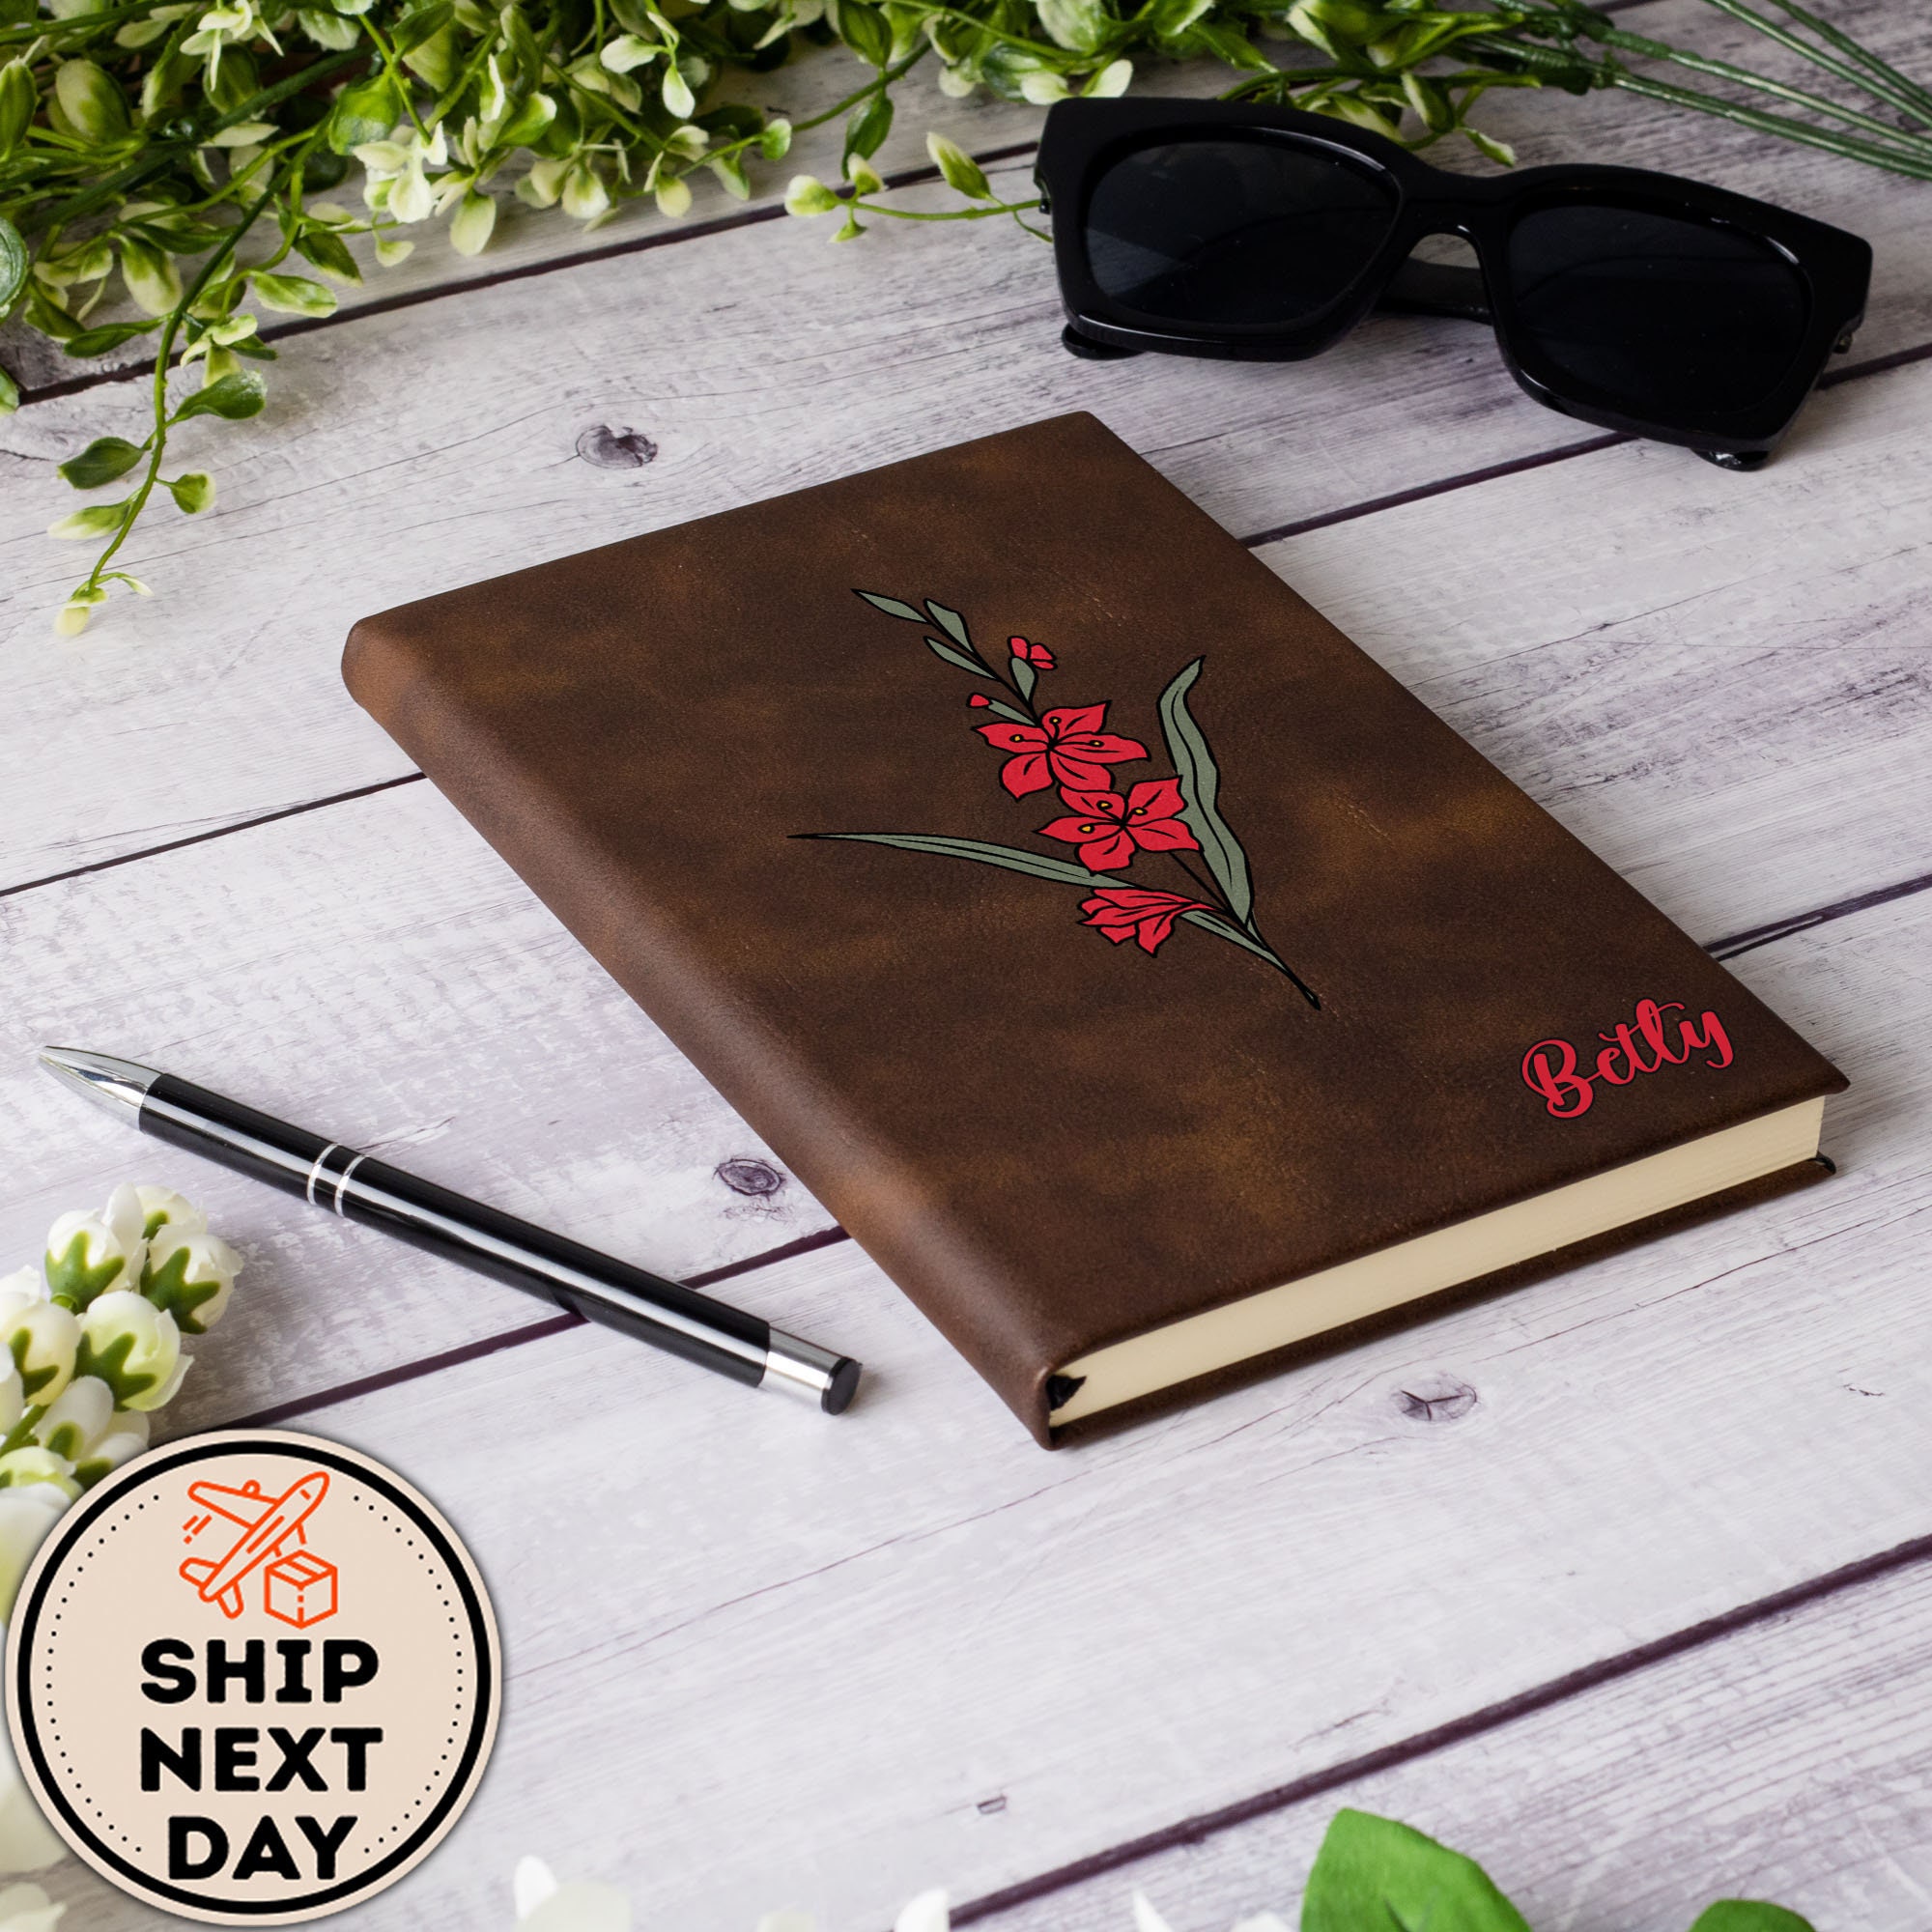 Sketch Book With Hard Cover by SM-LT Travelbook 